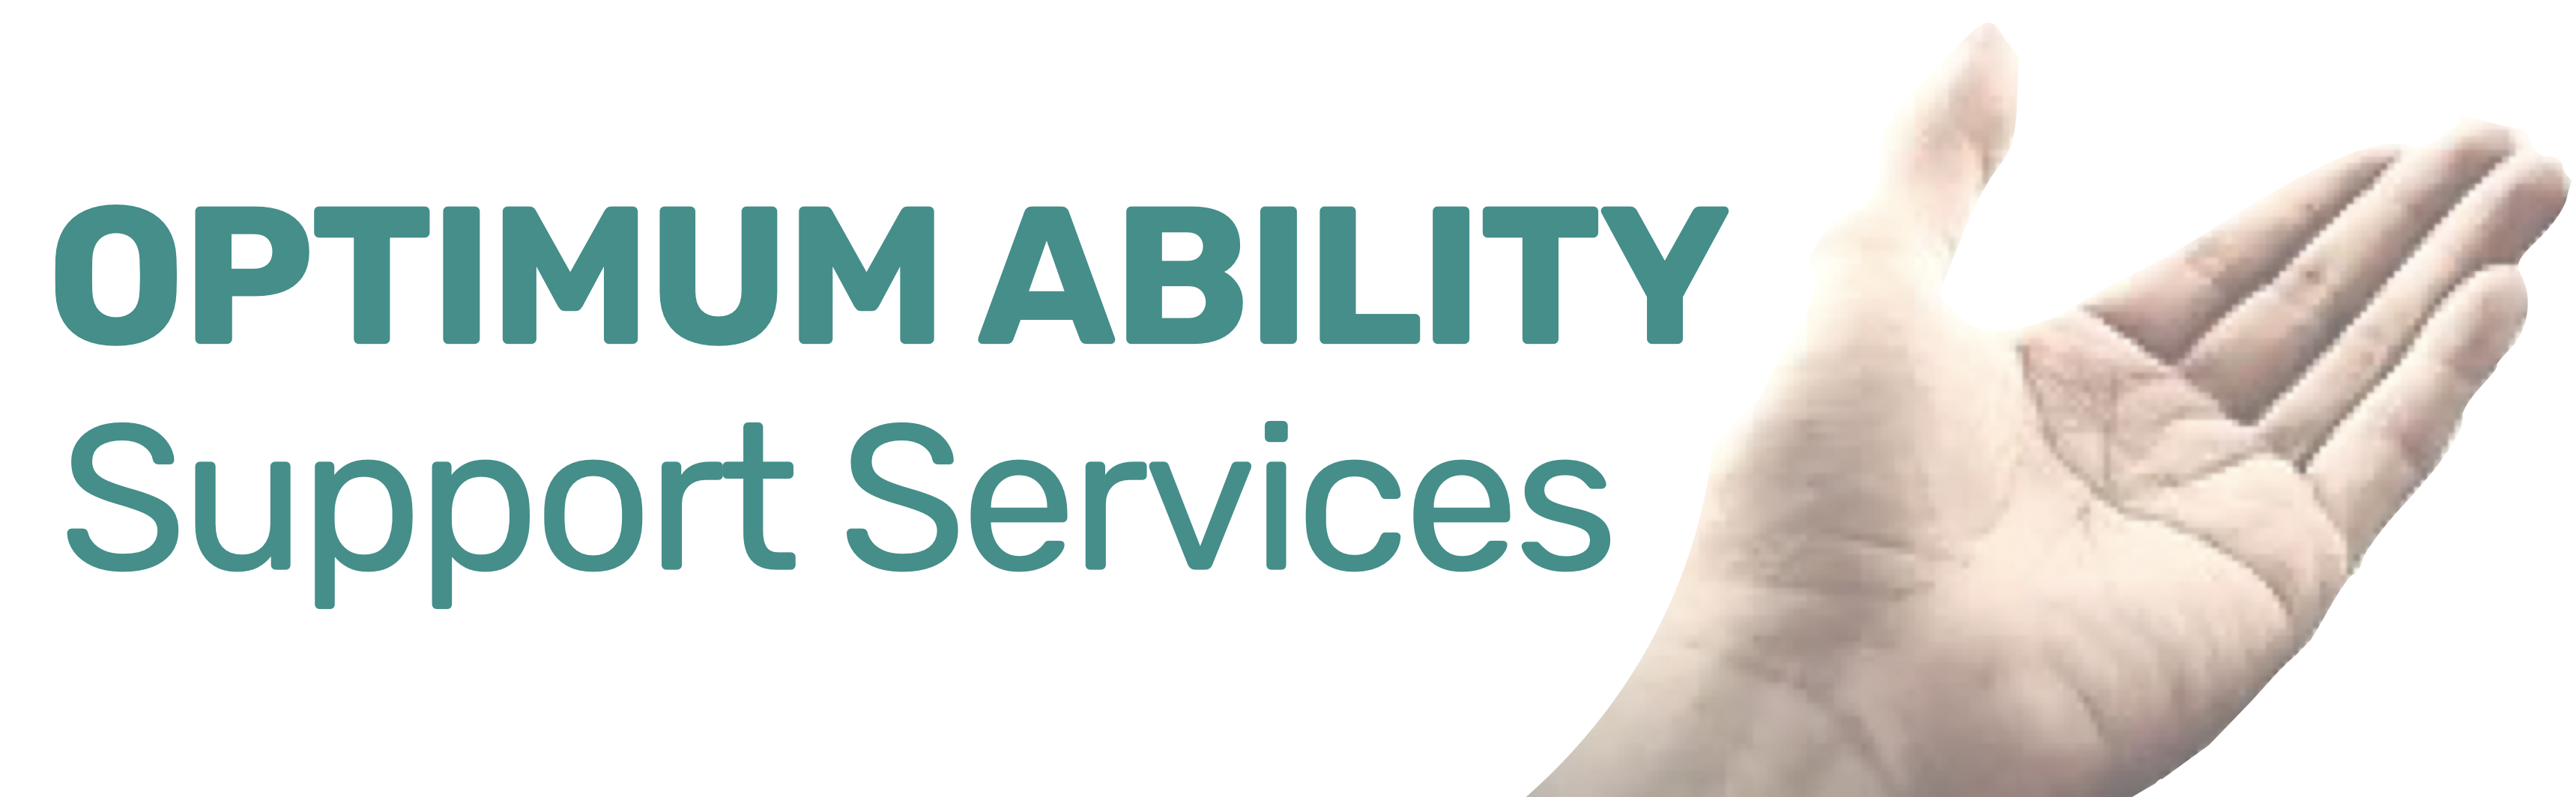 Optimum Ability Support Services